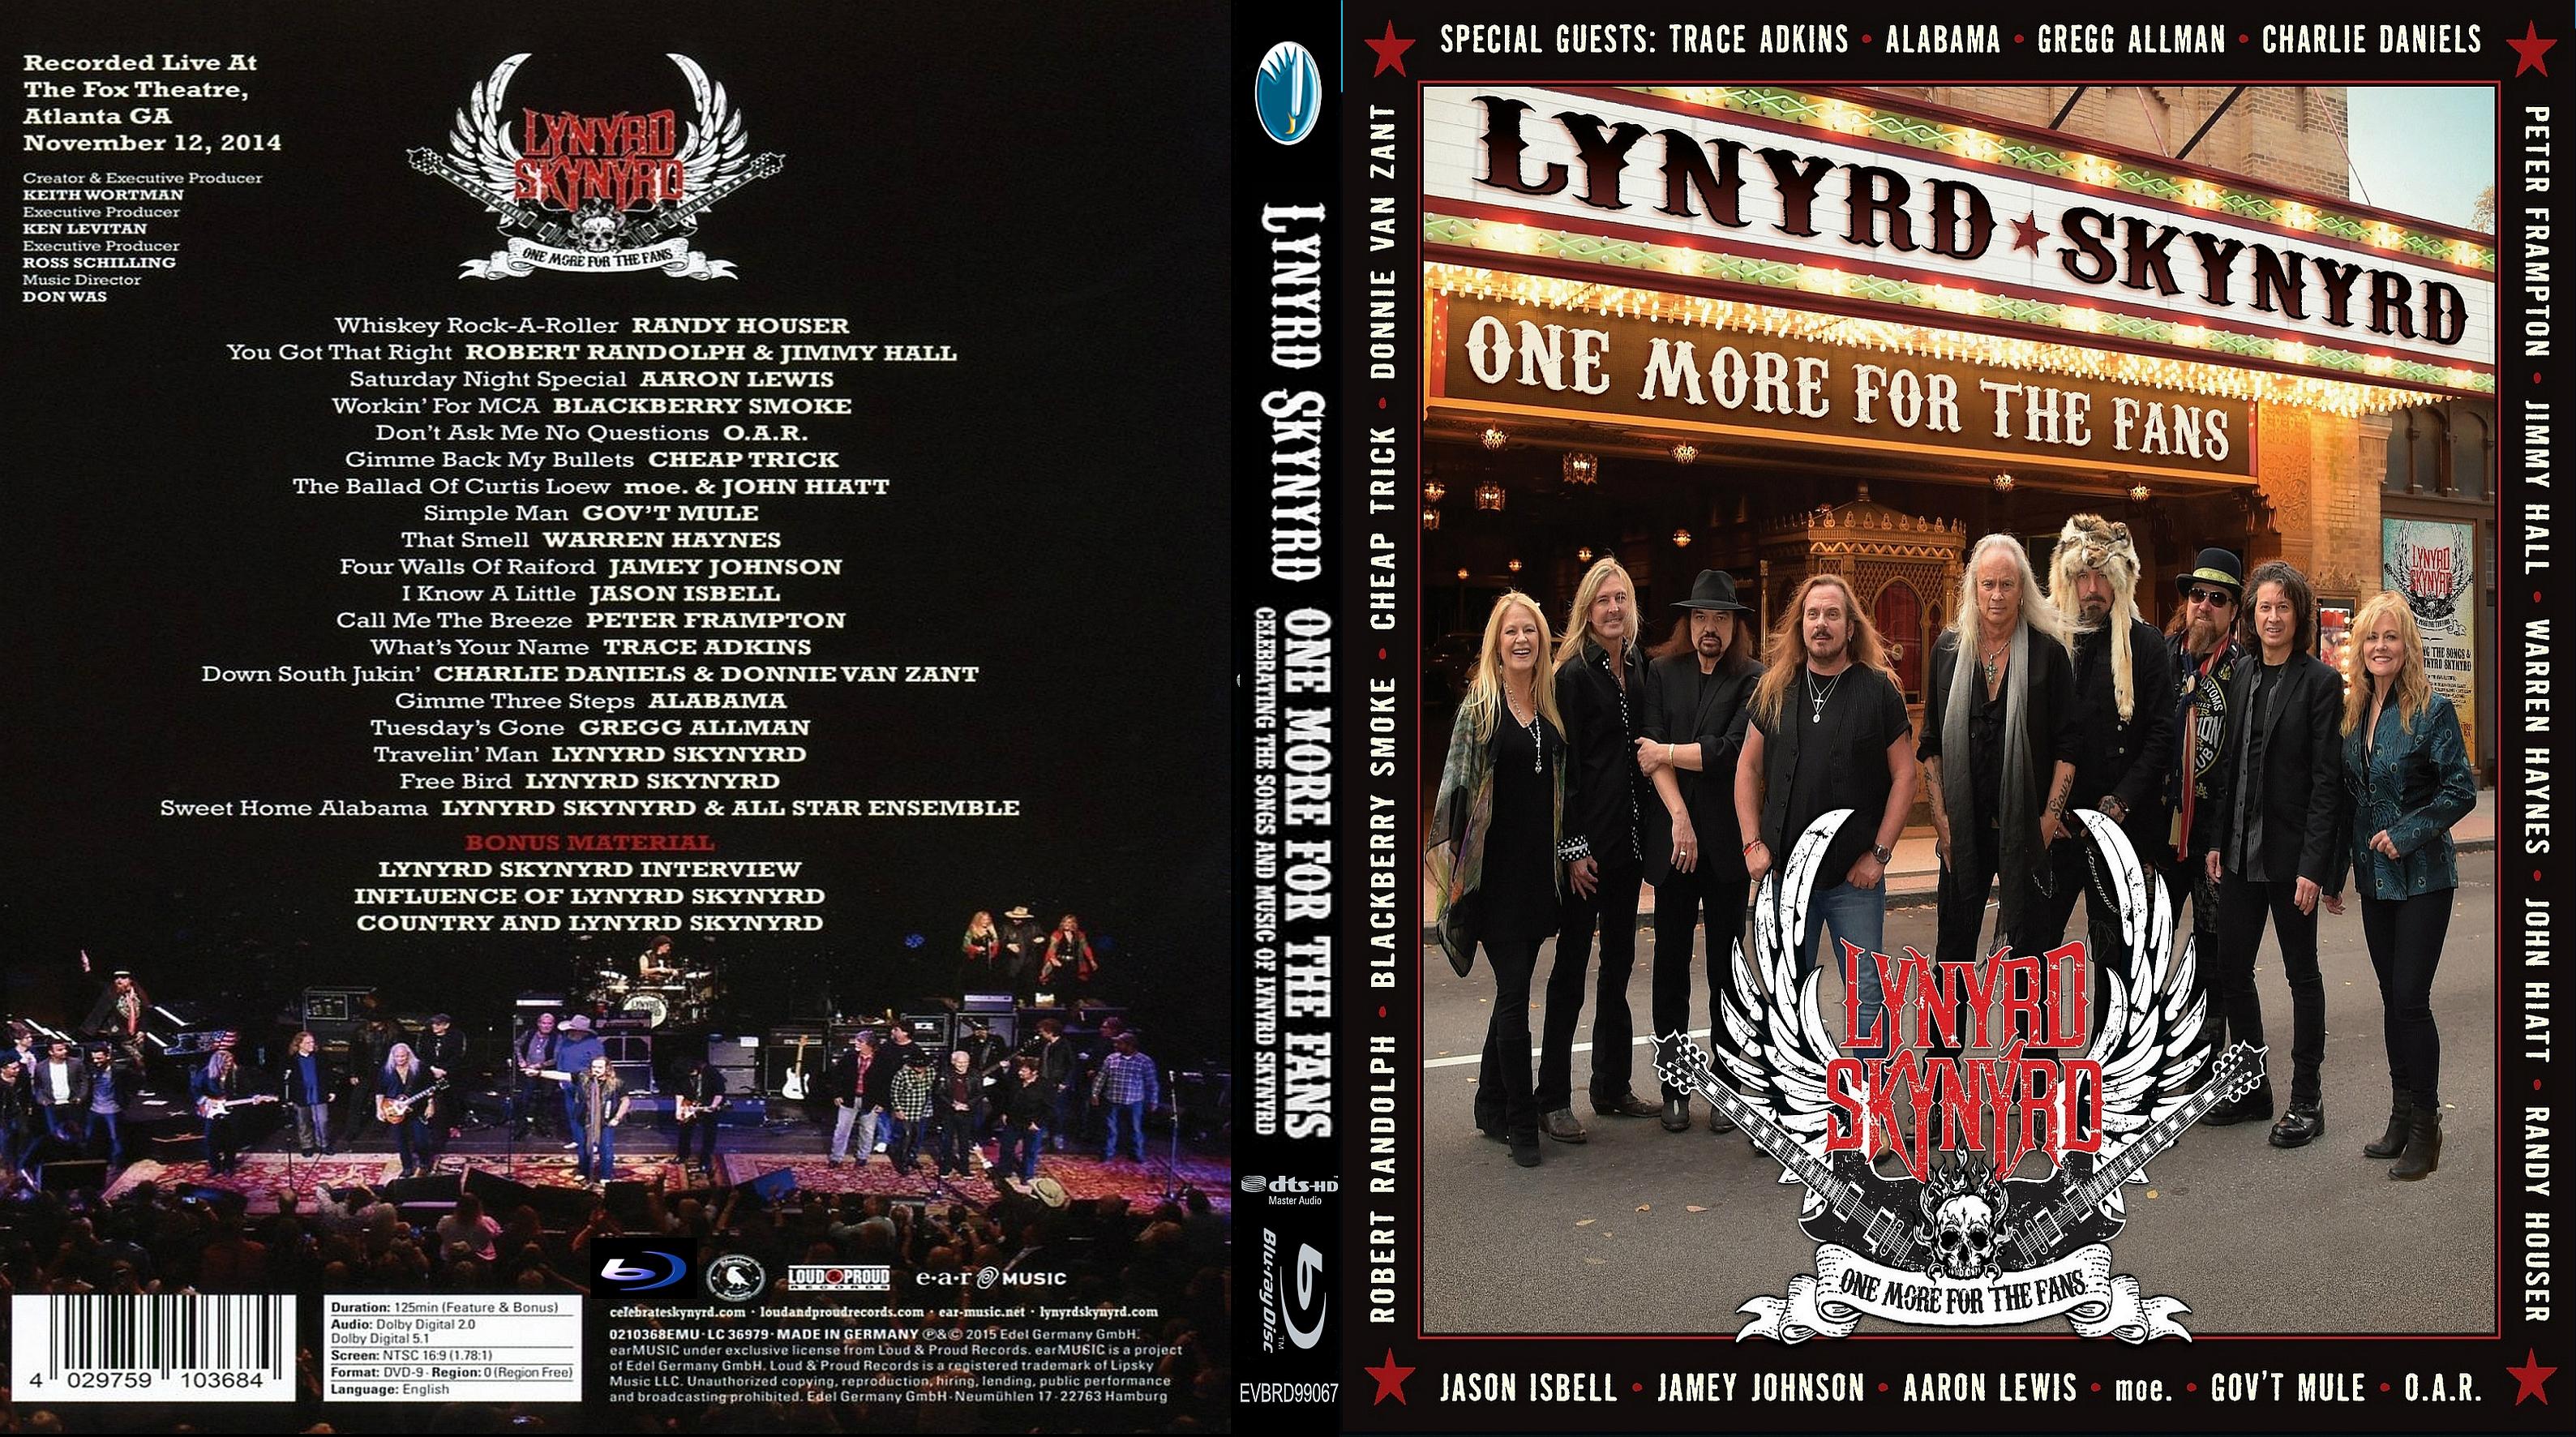 Lynyrd Skynyrd - One More For The Fans (2015) - front.